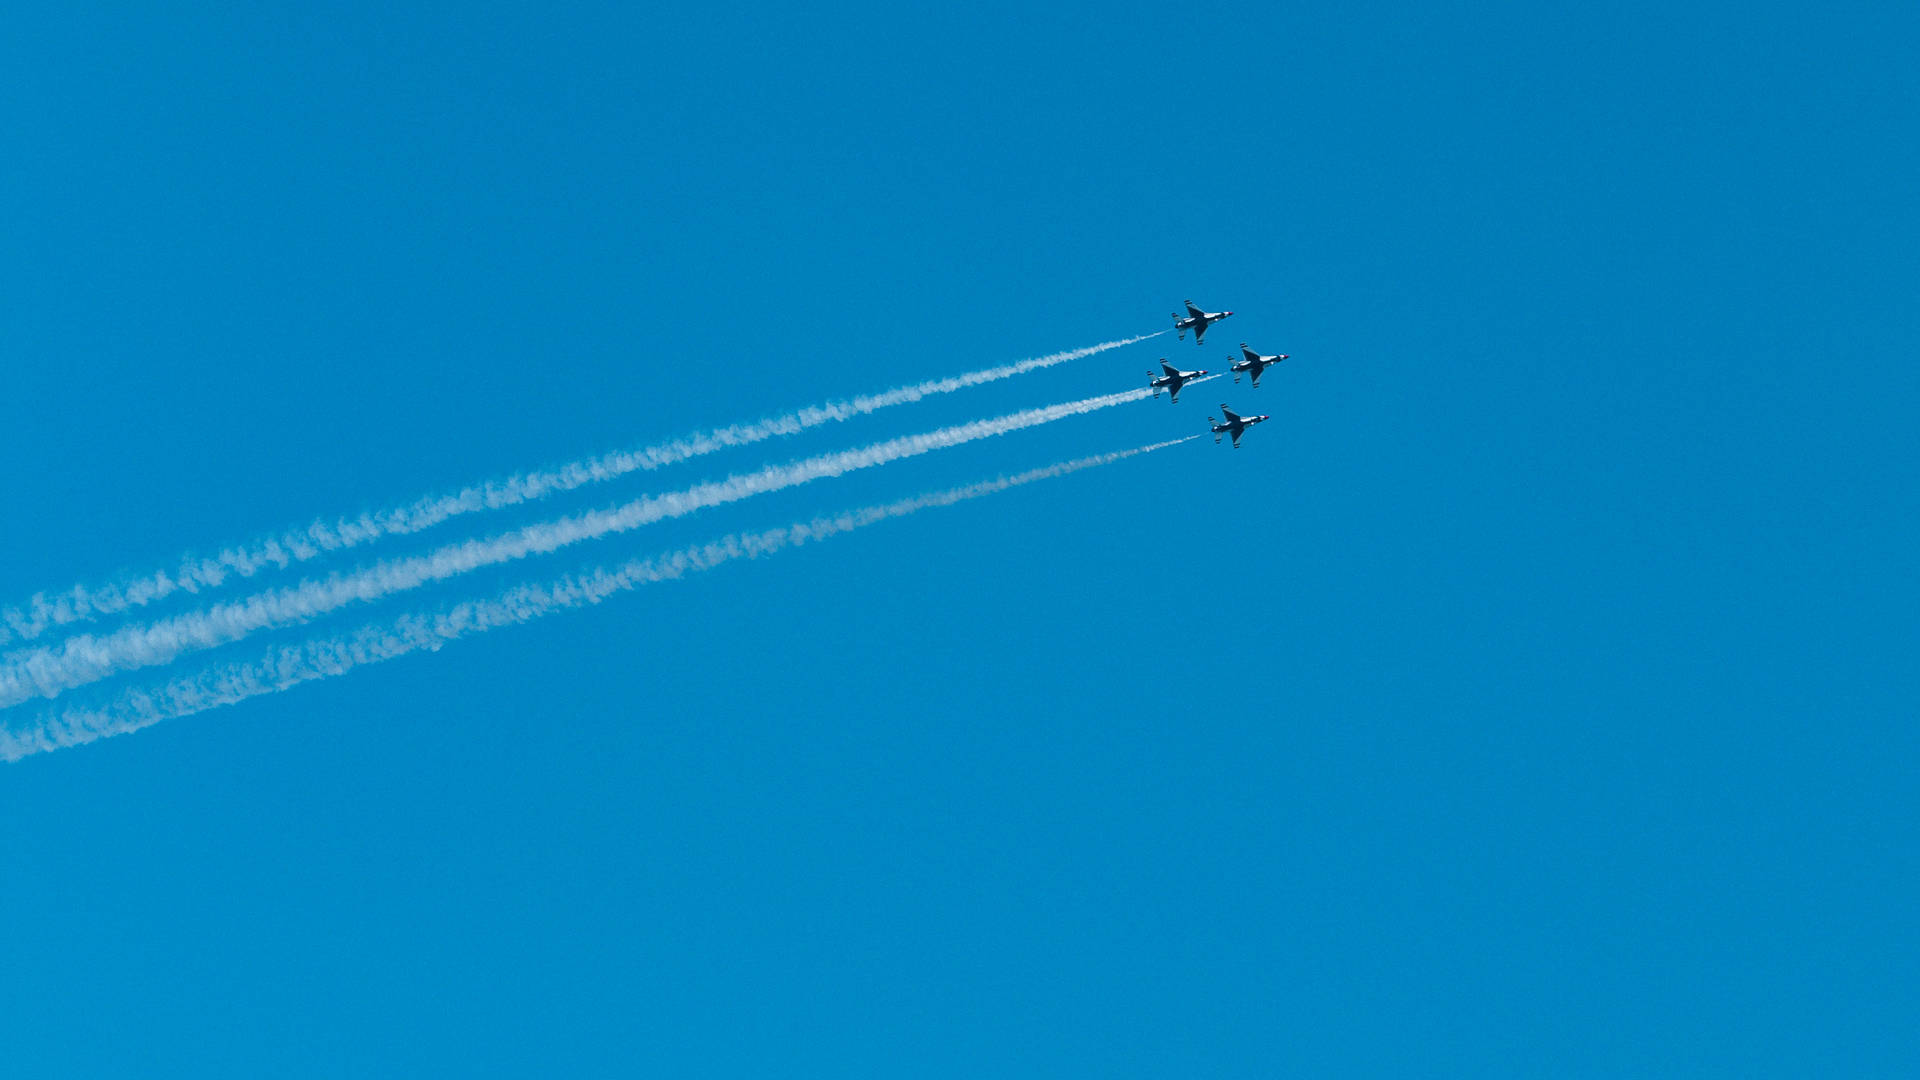 Four Fighter Jets In Plain Blue